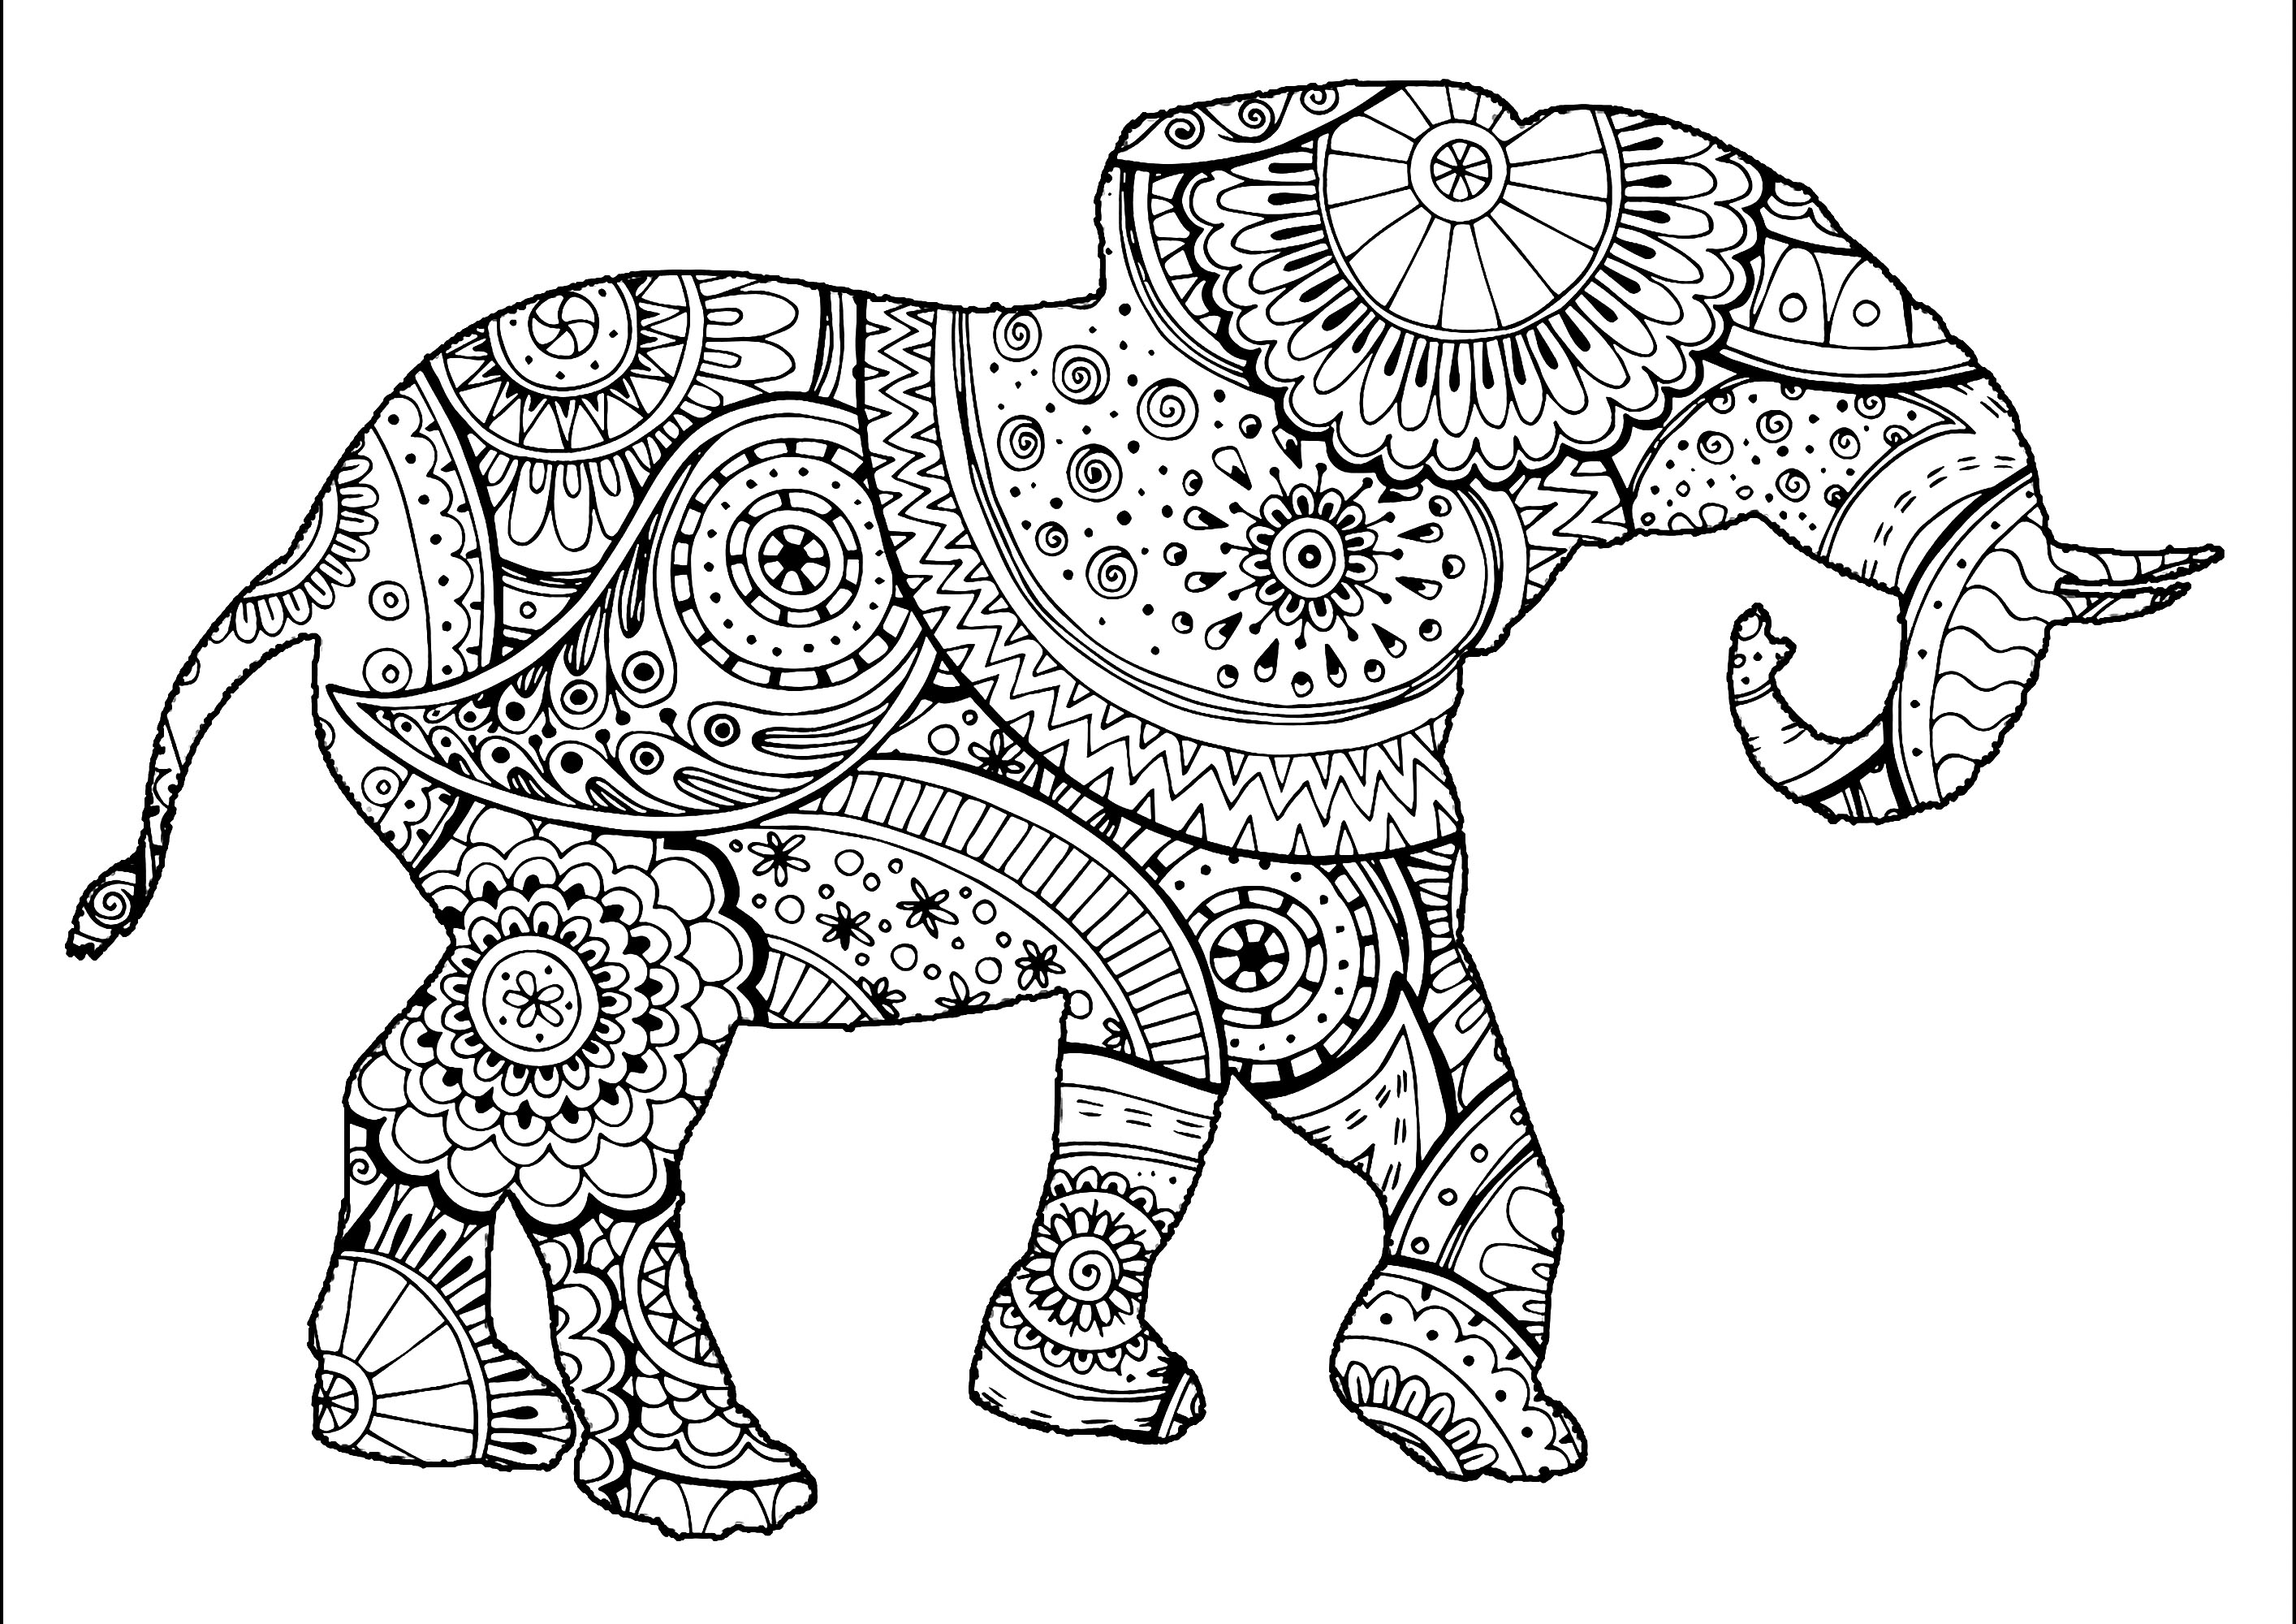 Download Elephant shape with patterns - Elephants Adult Coloring Pages